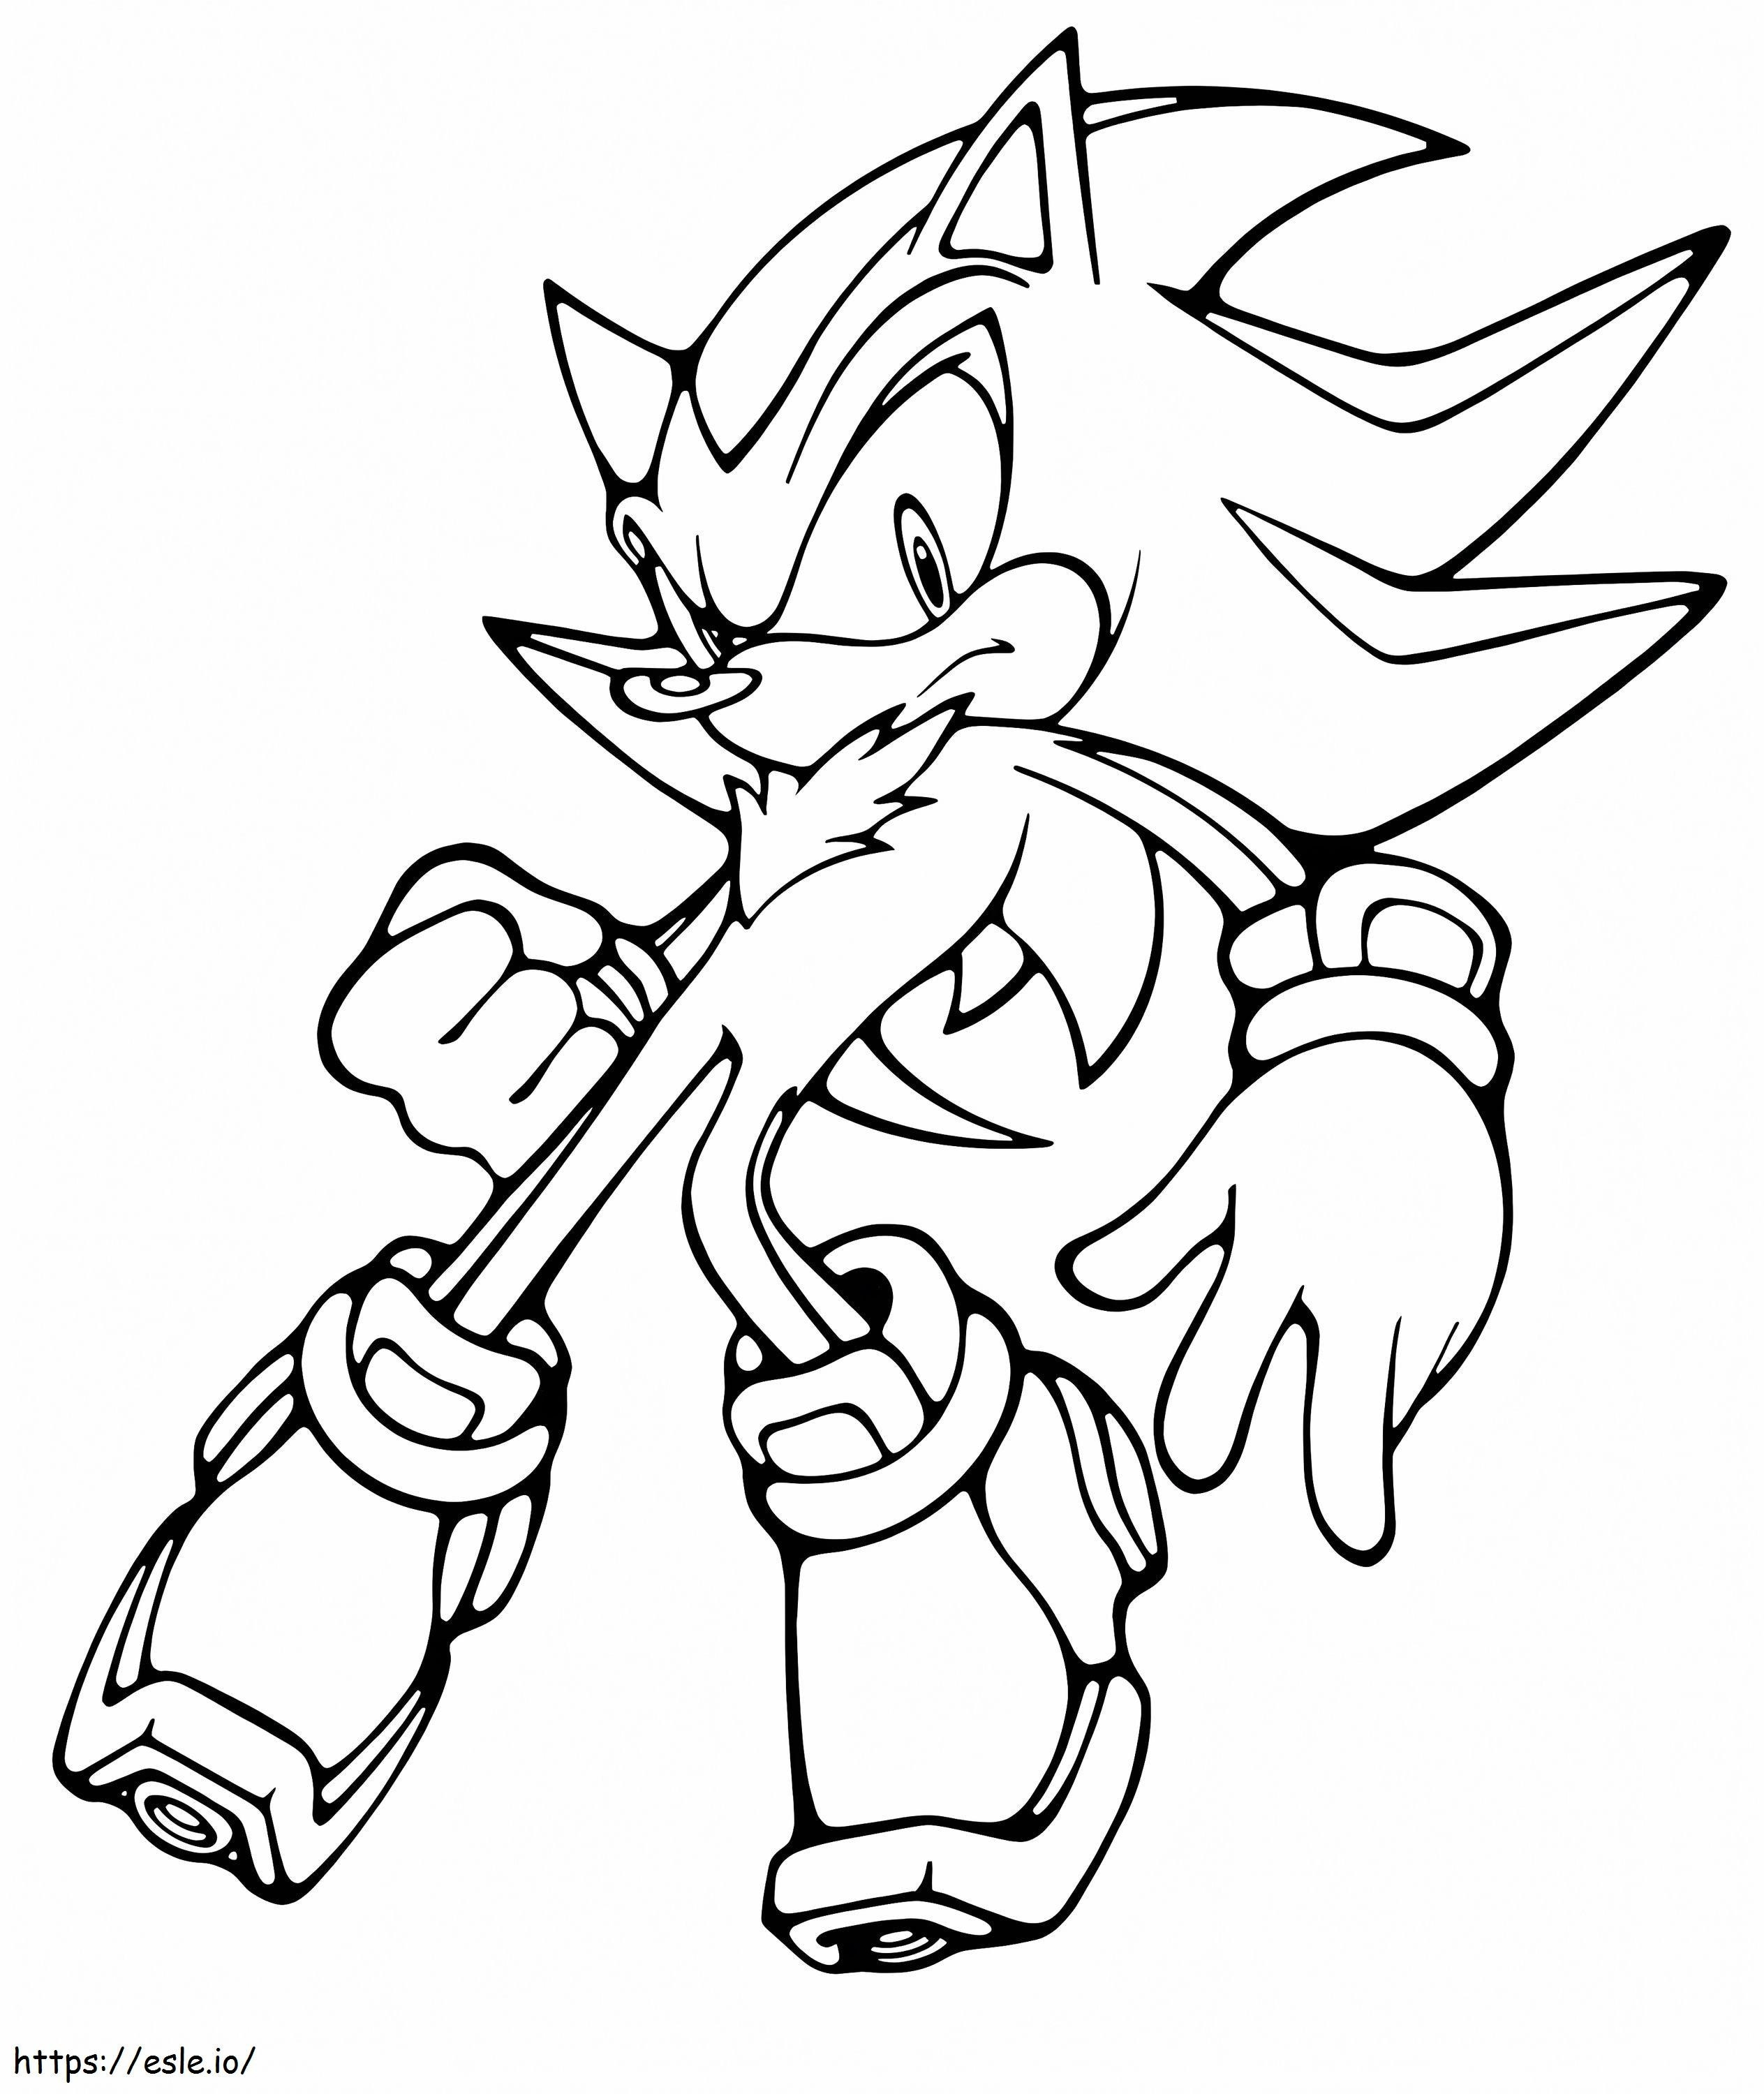 Sonic 1 coloring page